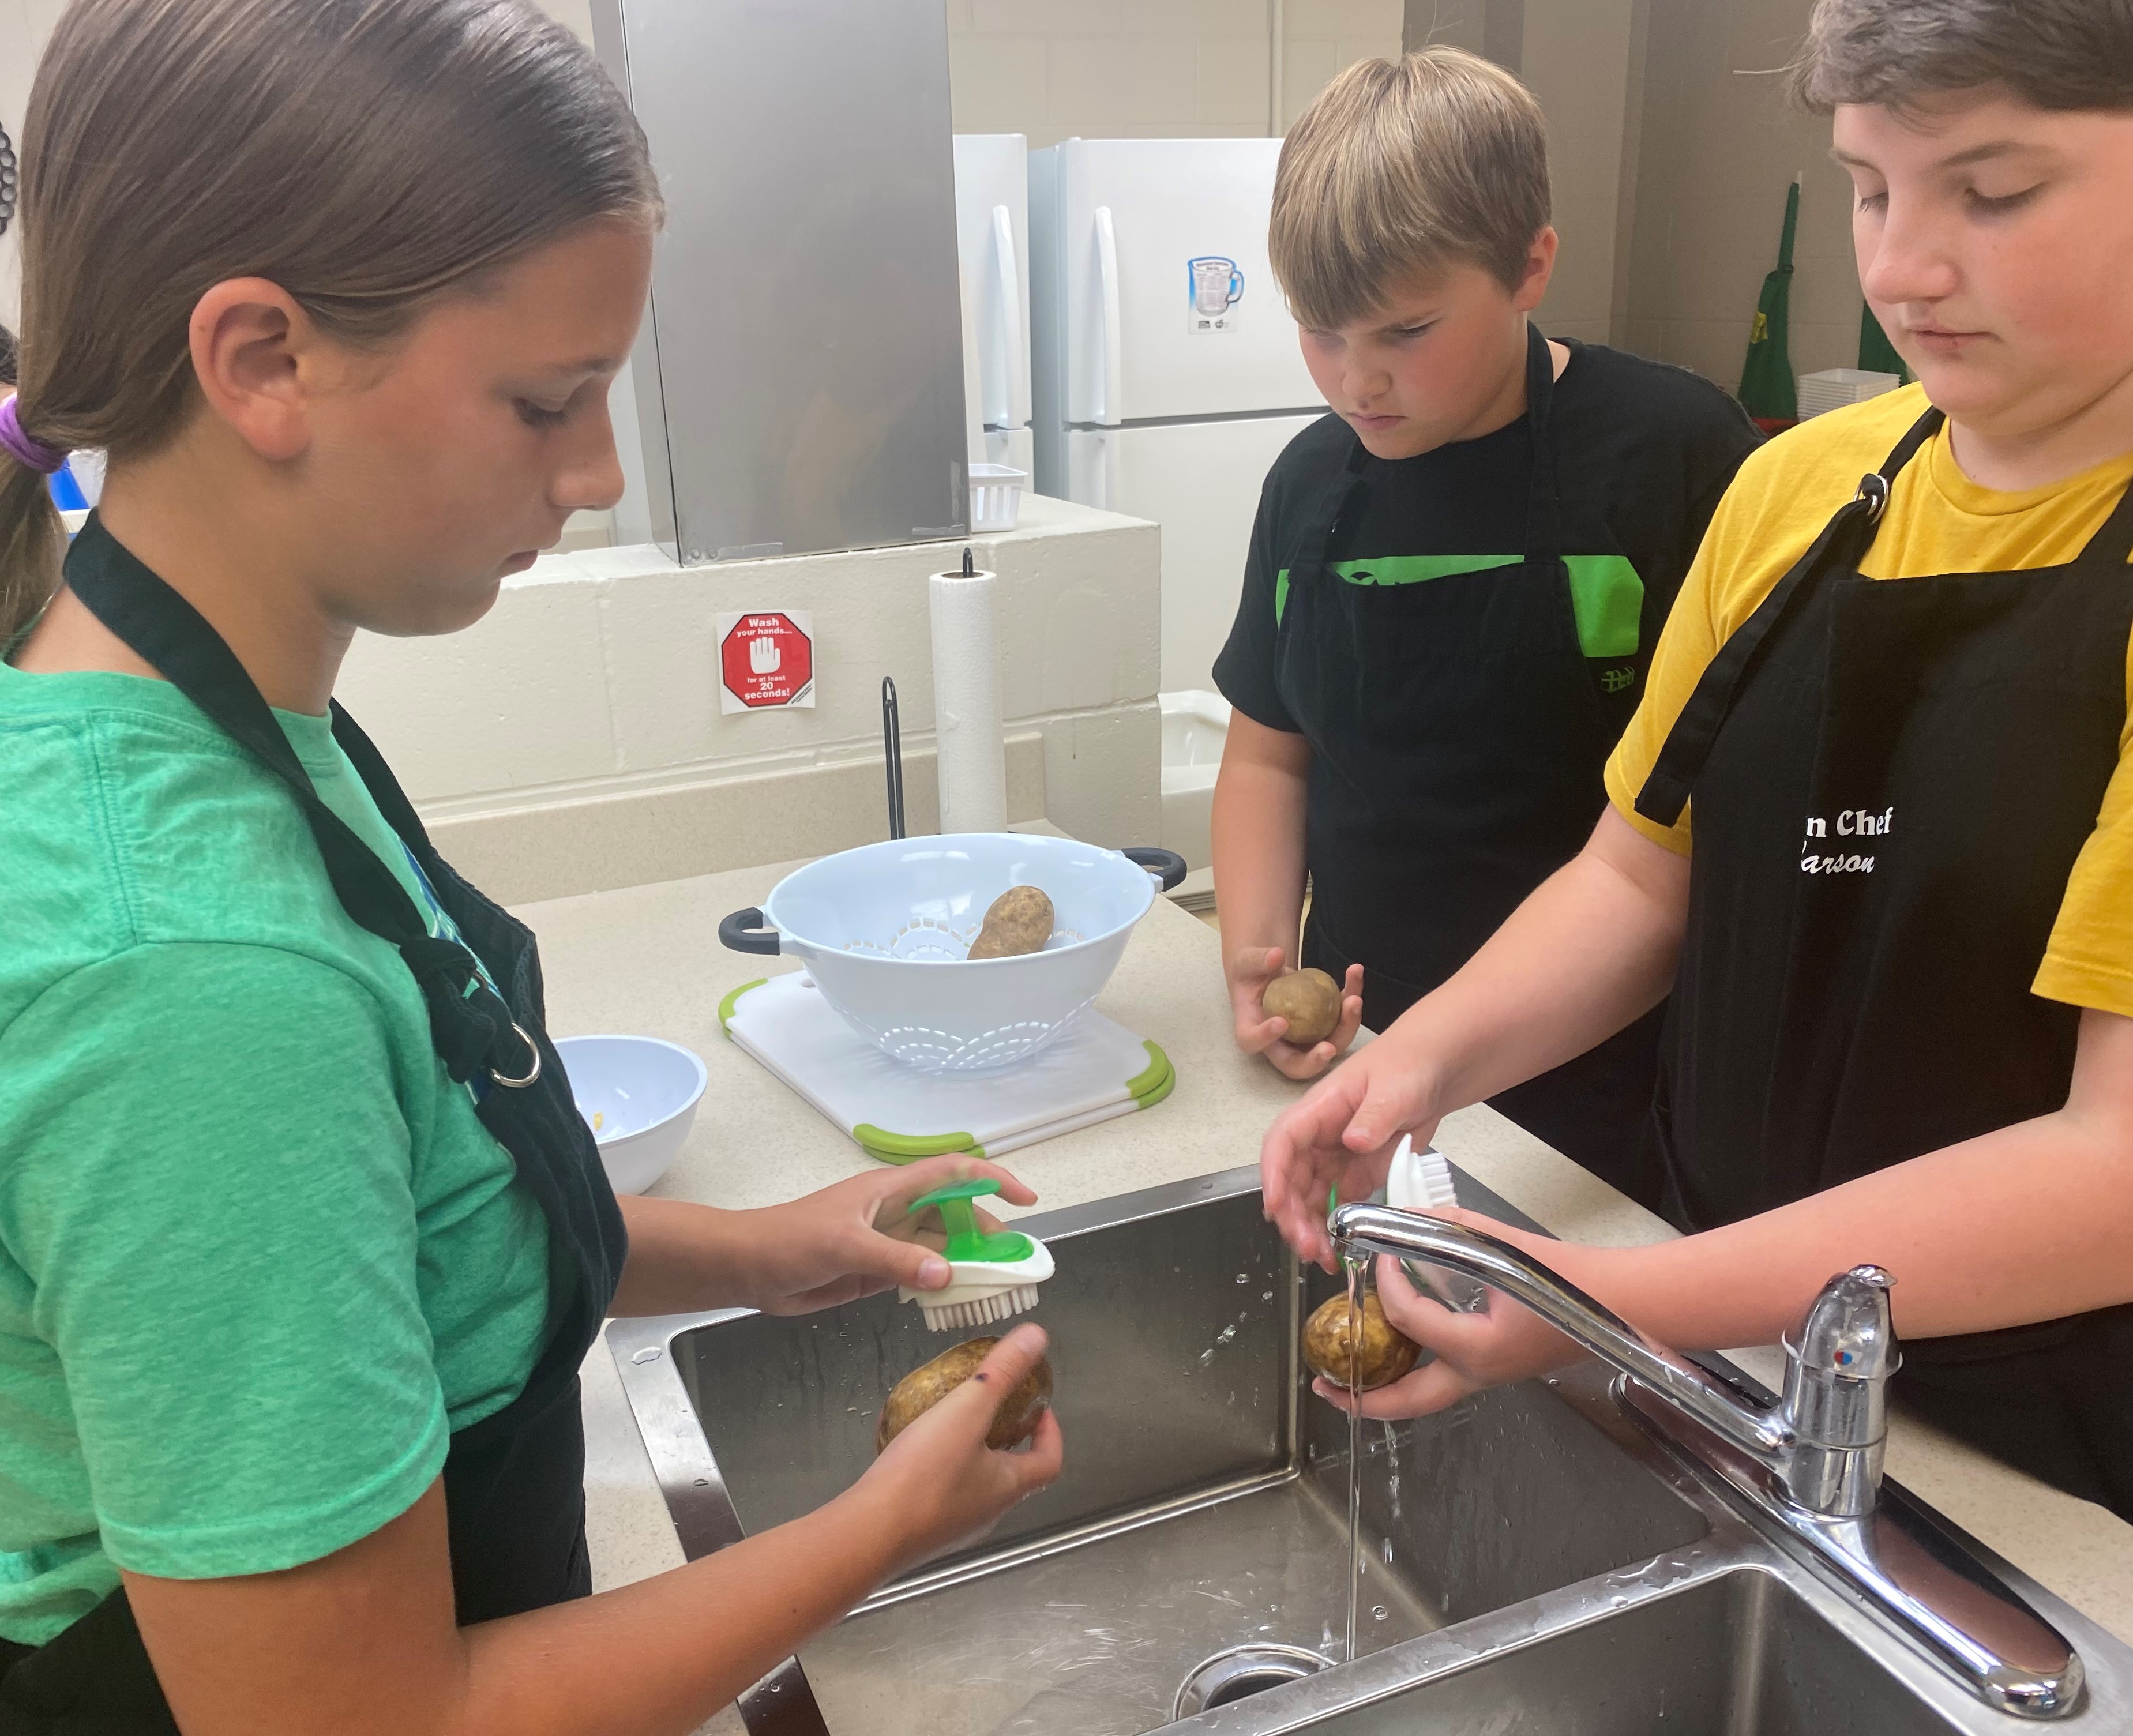 On the Move to Better Health: Kids Cooking and Baking Schools (NDSU photo)